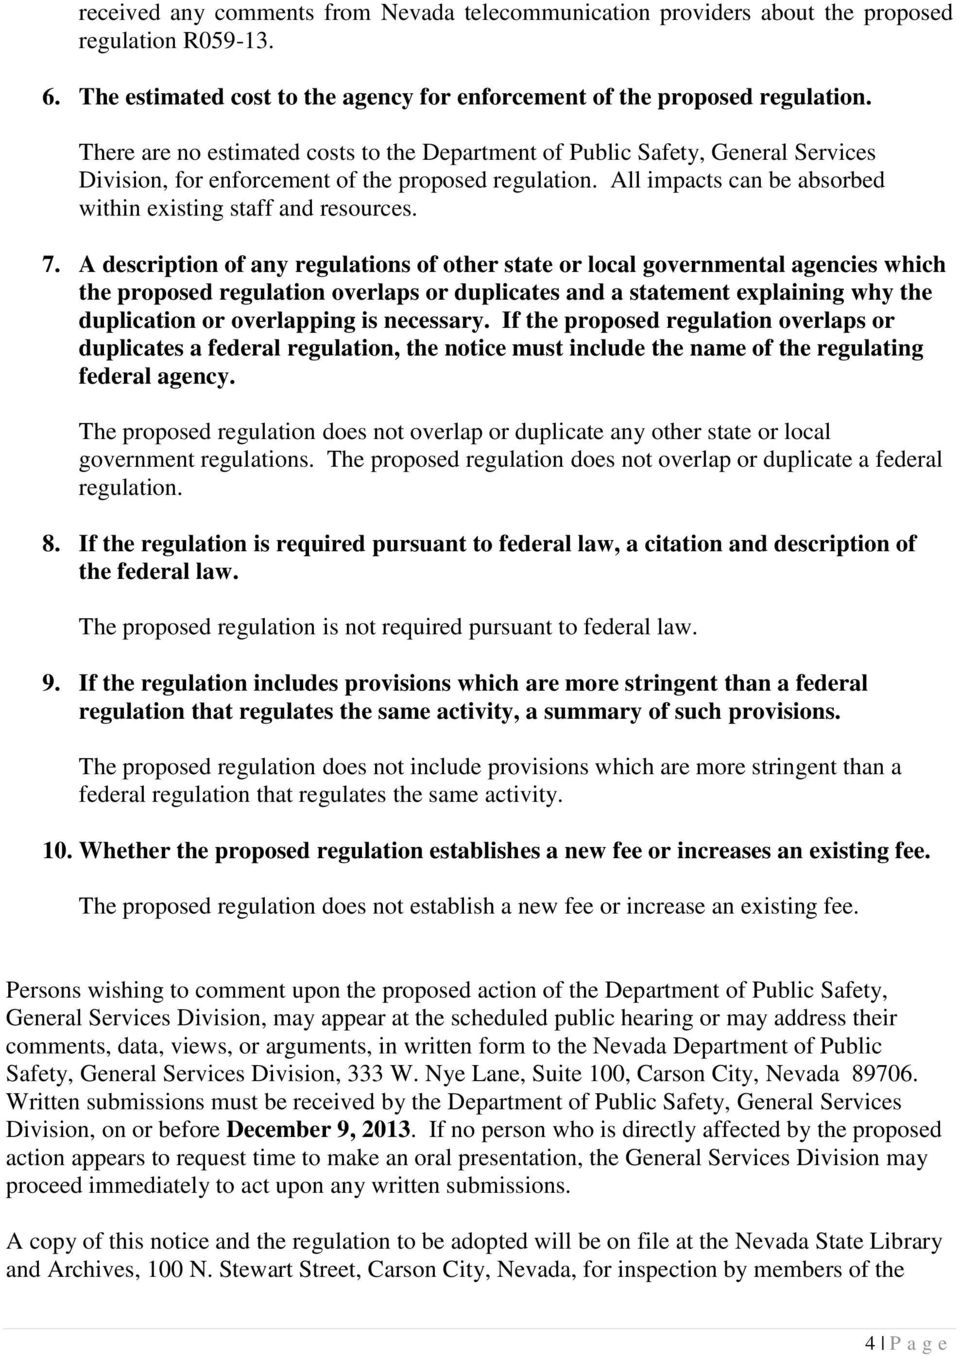 7. A description of any regulations of other state or local governmental agencies which the proposed regulation overlaps or duplicates and a statement explaining why the duplication or overlapping is